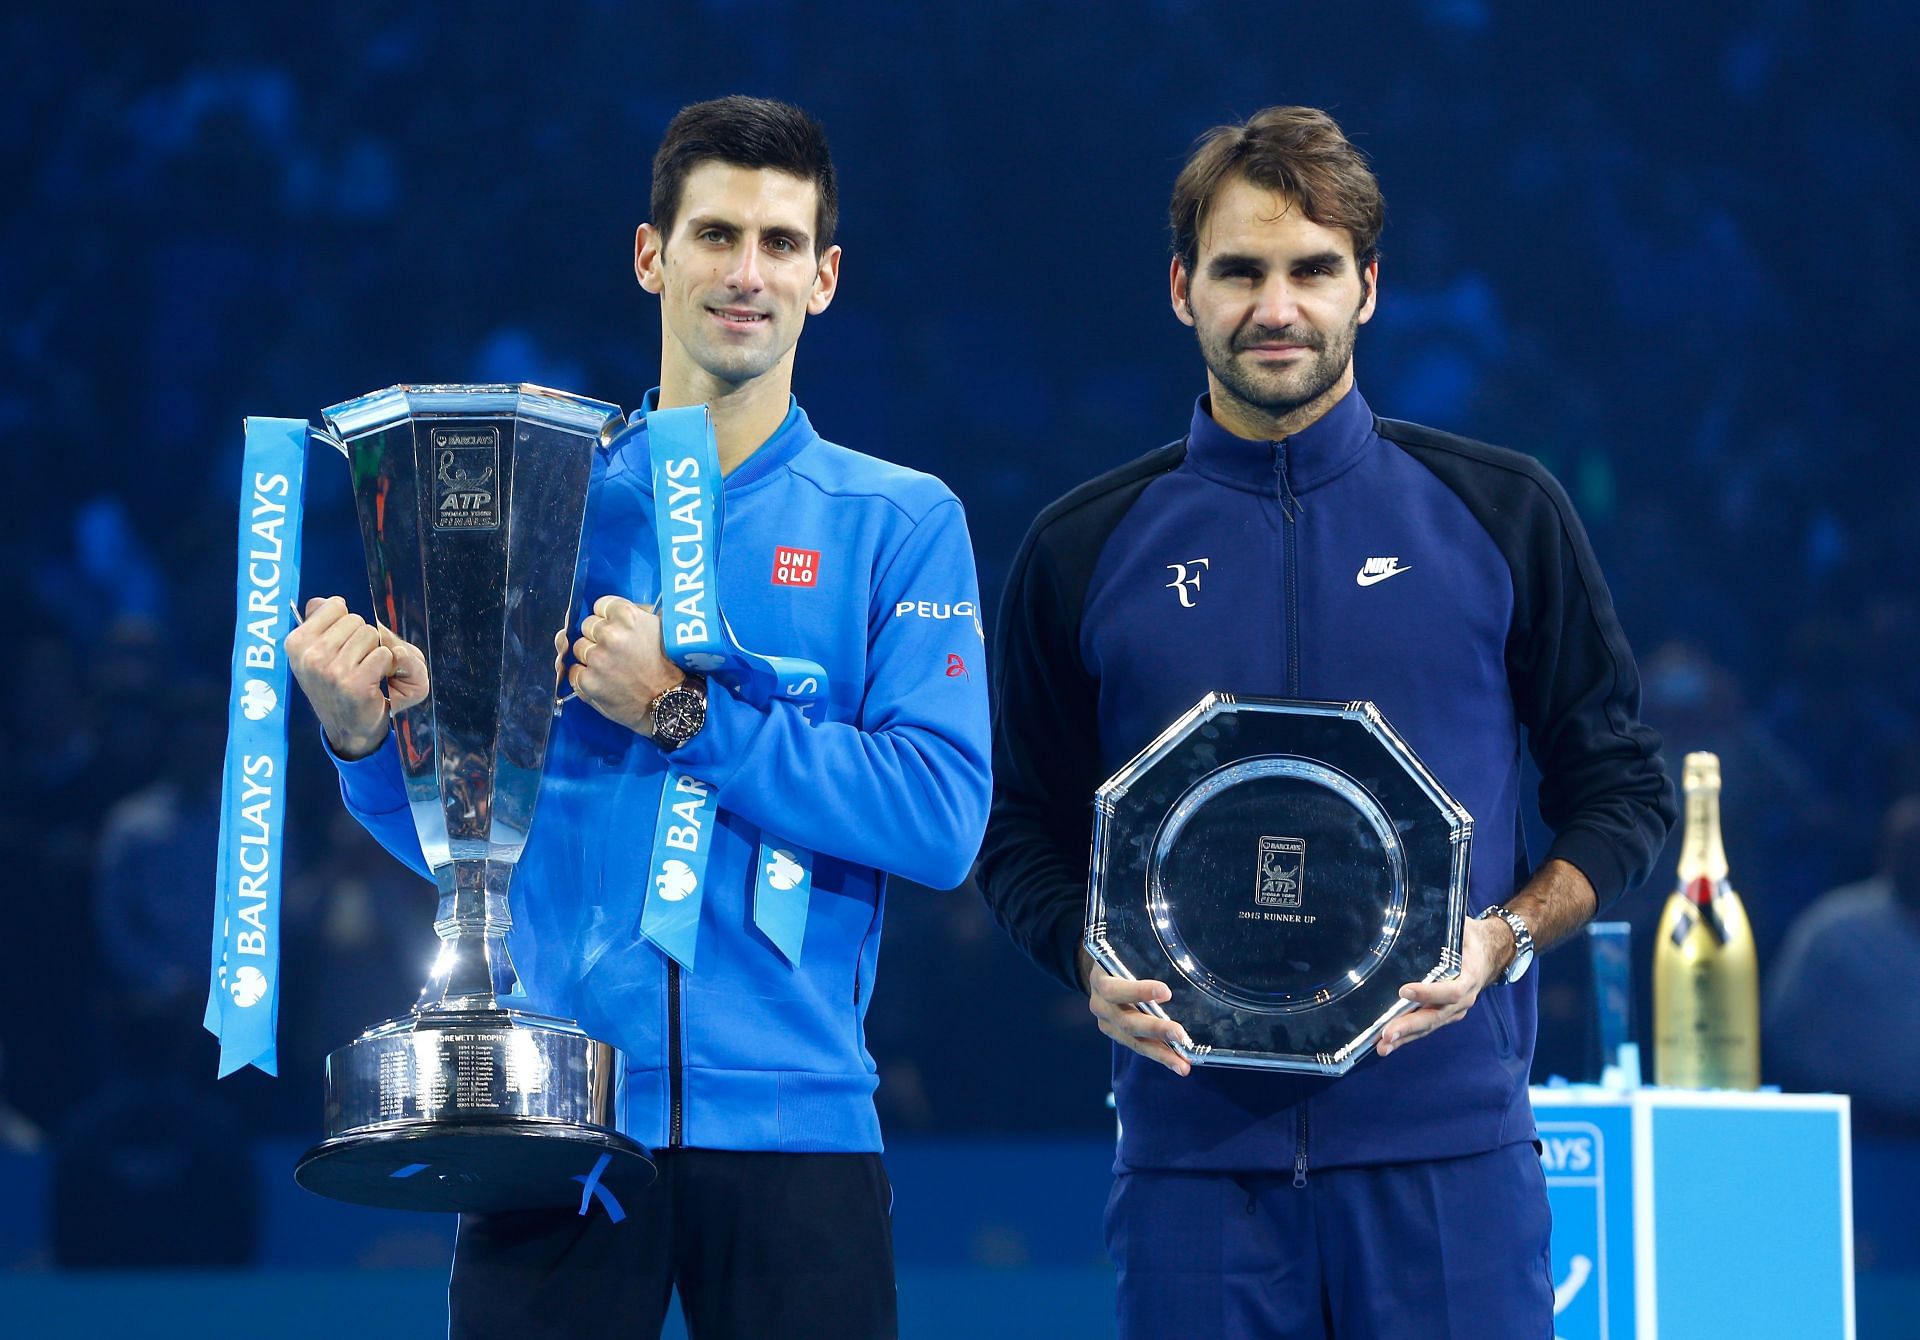 Champion Novak Djokovic (left) and runner-up Roger Federer (right) pose with their respective trophies at the ATP Finals in 2015.